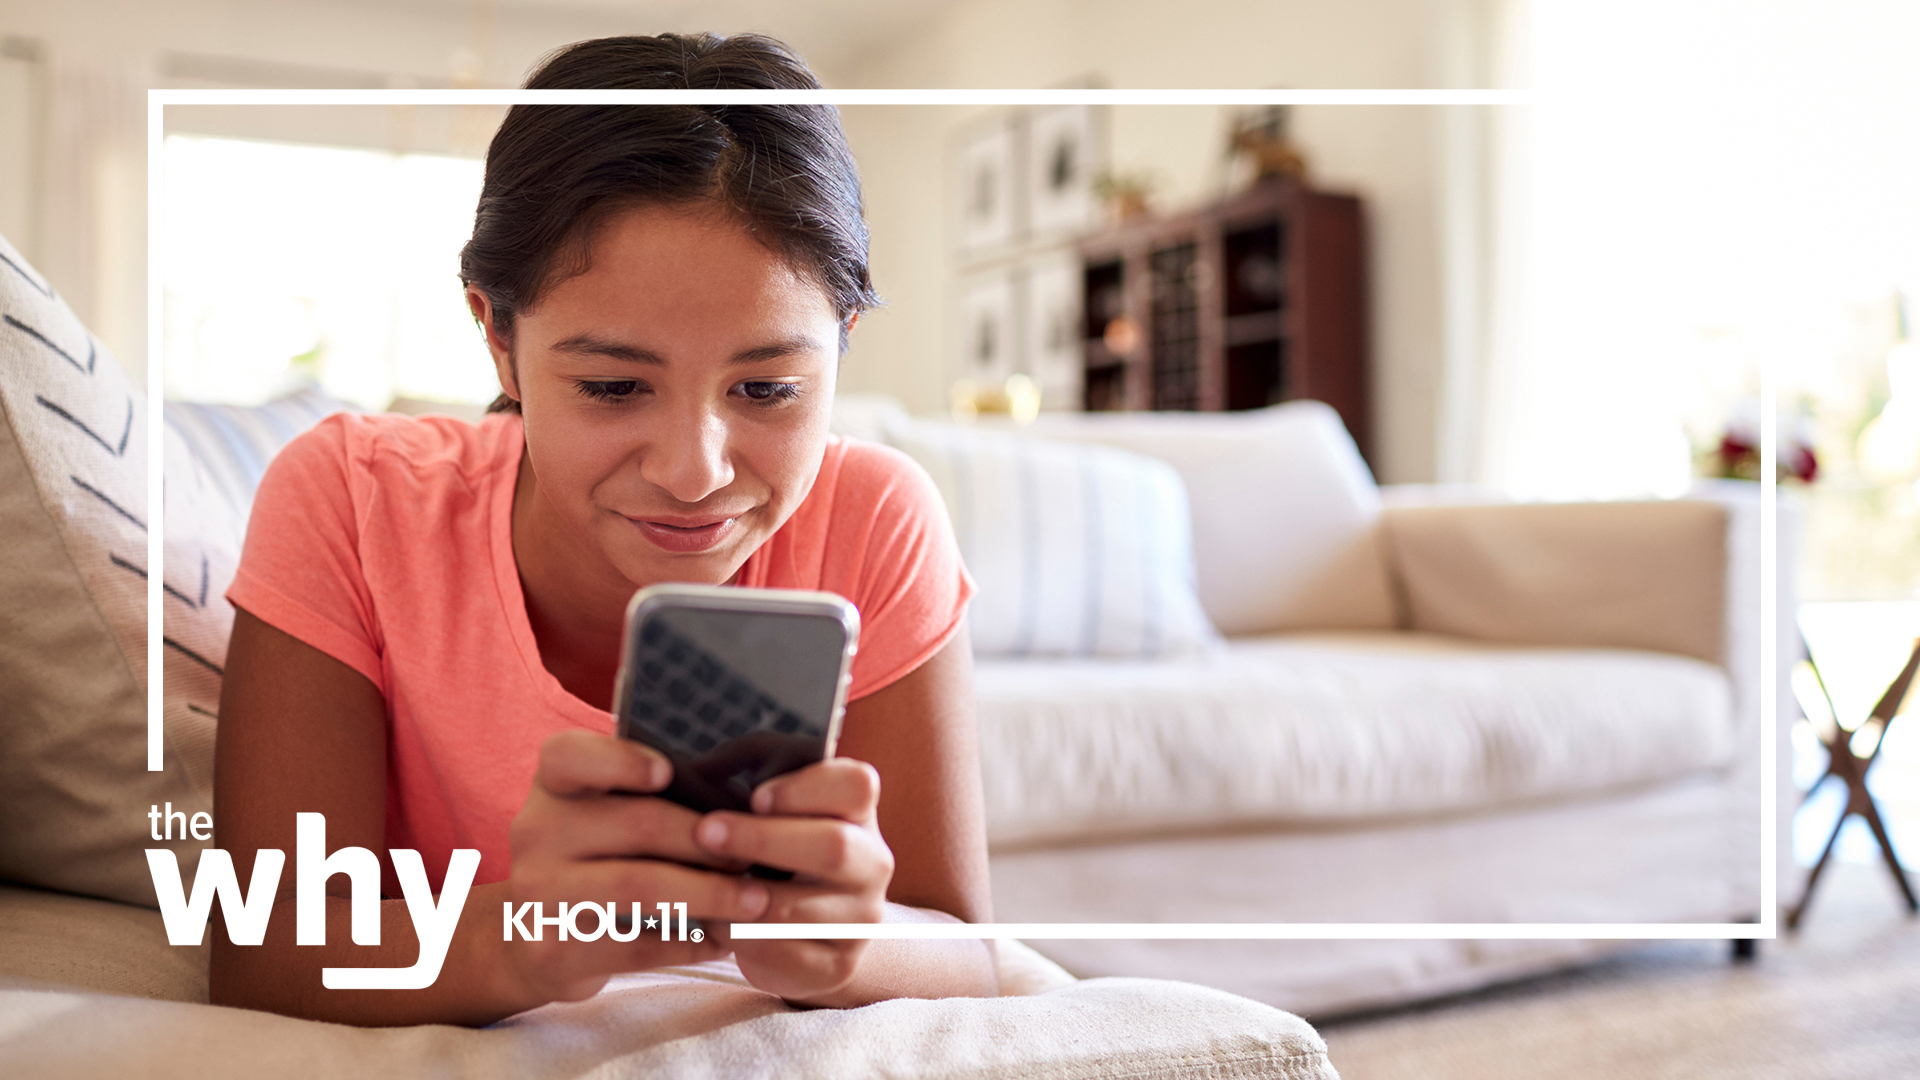 New research shows parents play a big role when it comes to healthy screen use.